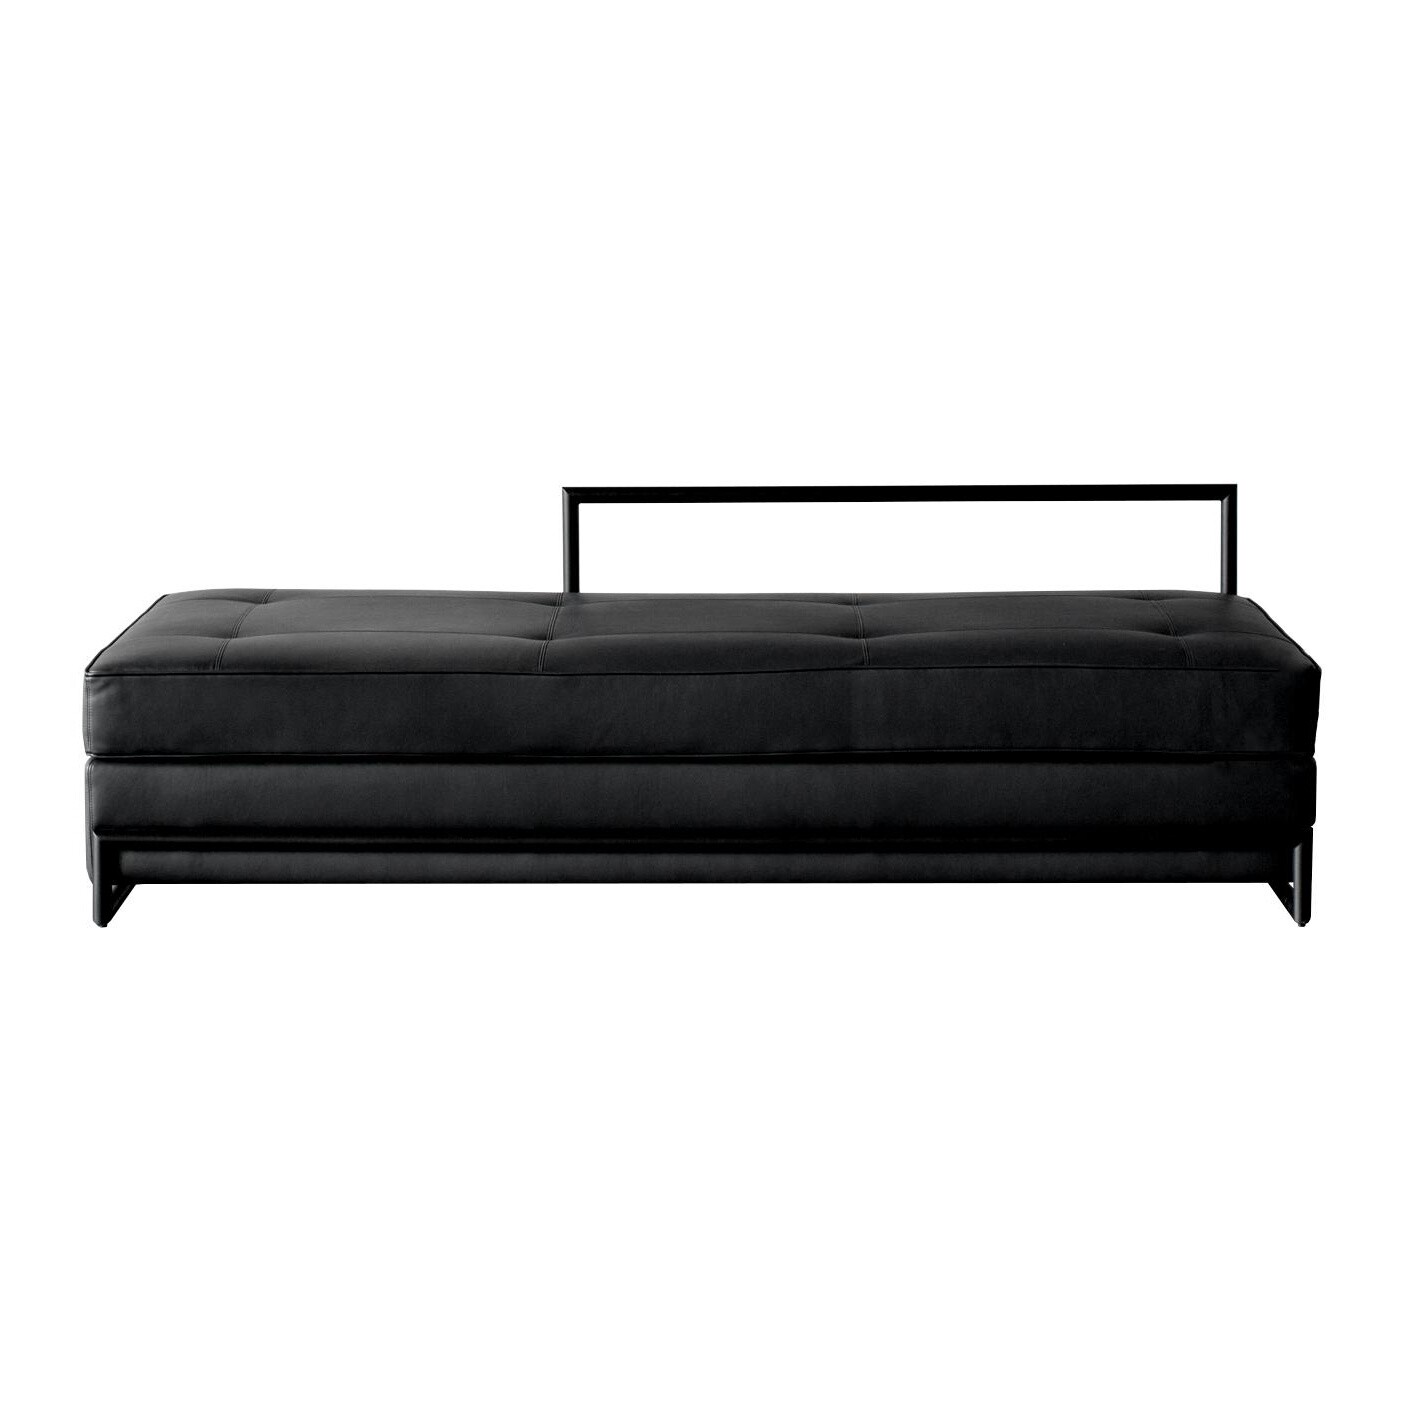 Classicon Day Bed Black Version Lounge, White Leather Trundle Bed